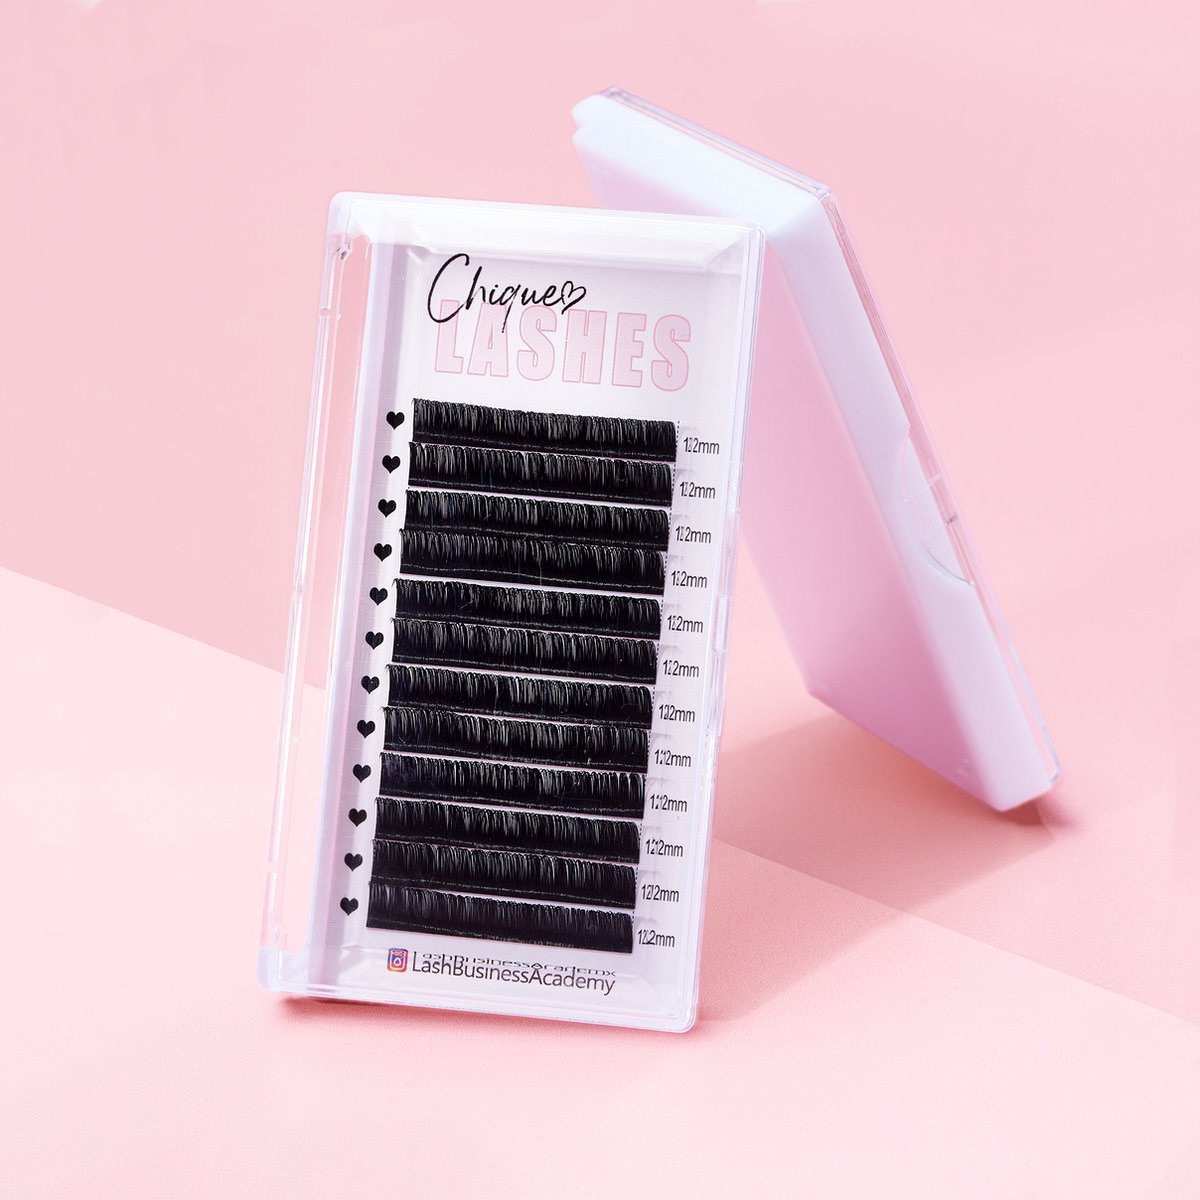 Chique Lashes wimperextensions - Cc curl - dikte 0.15 - Mixed lenghts 8-15mm